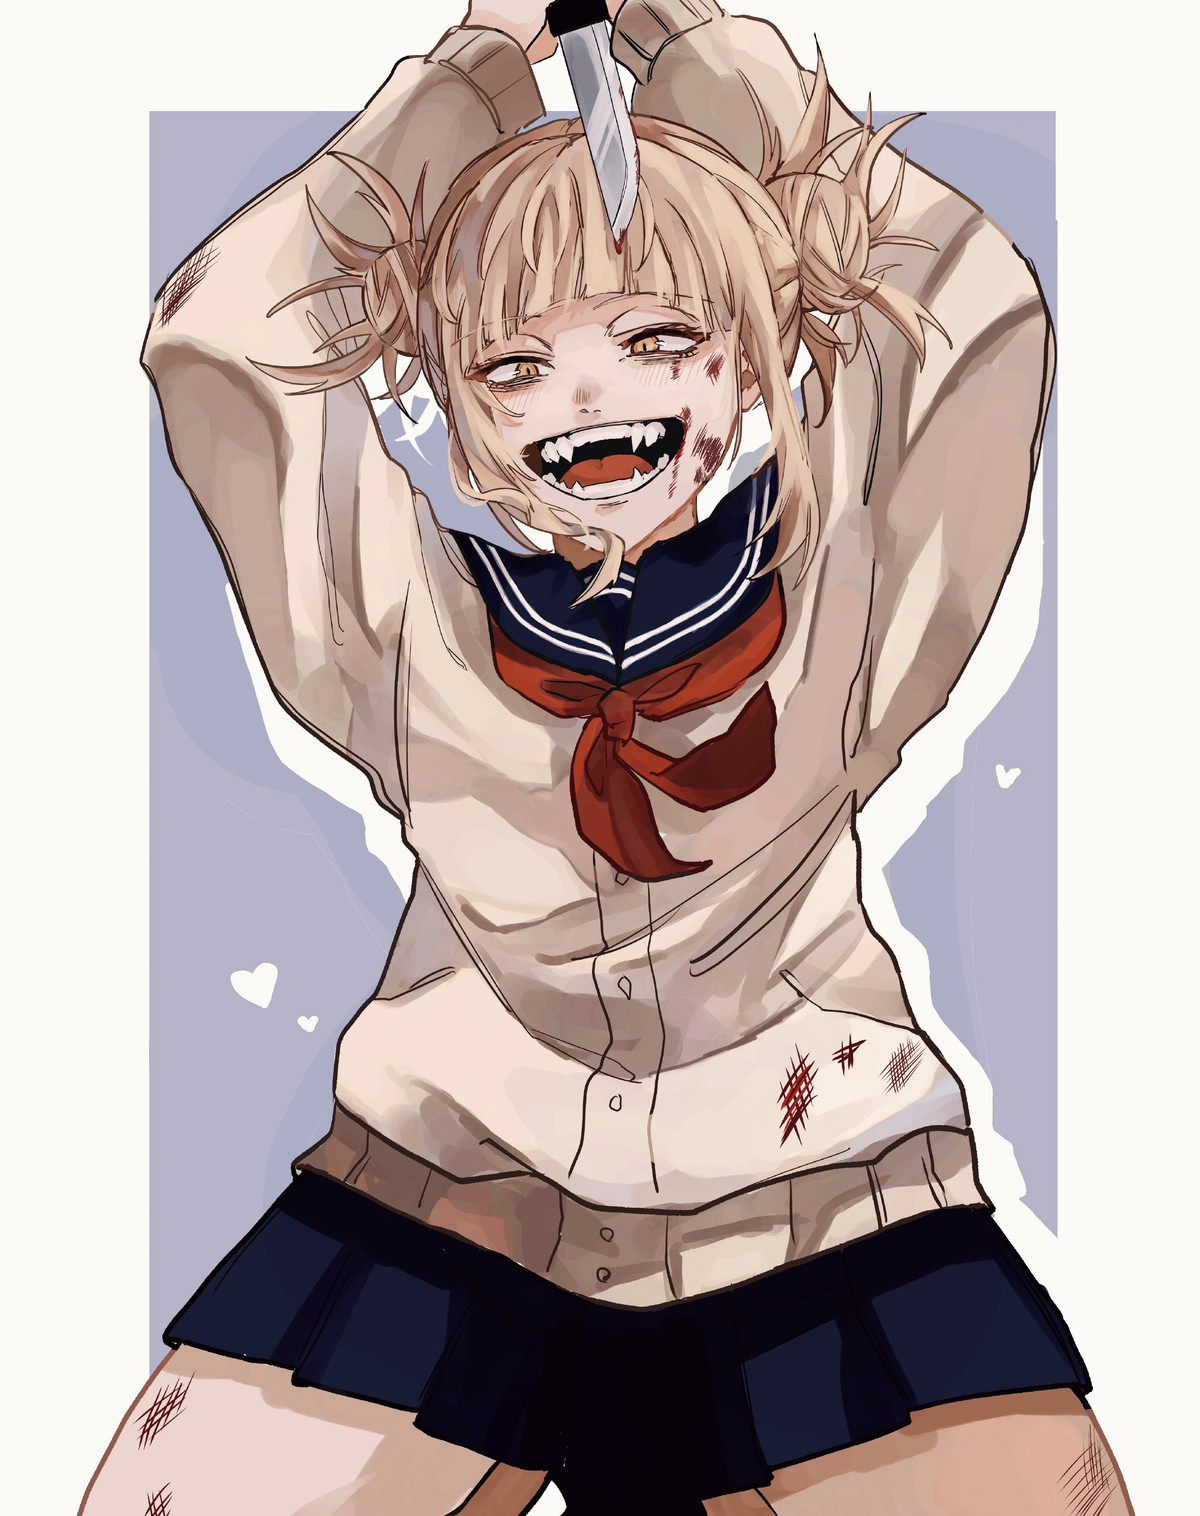 Daily Toga - 954: She likes you. join list: DailyToga (503 subs)Mention History Source: .. She thinks I’m tasty?